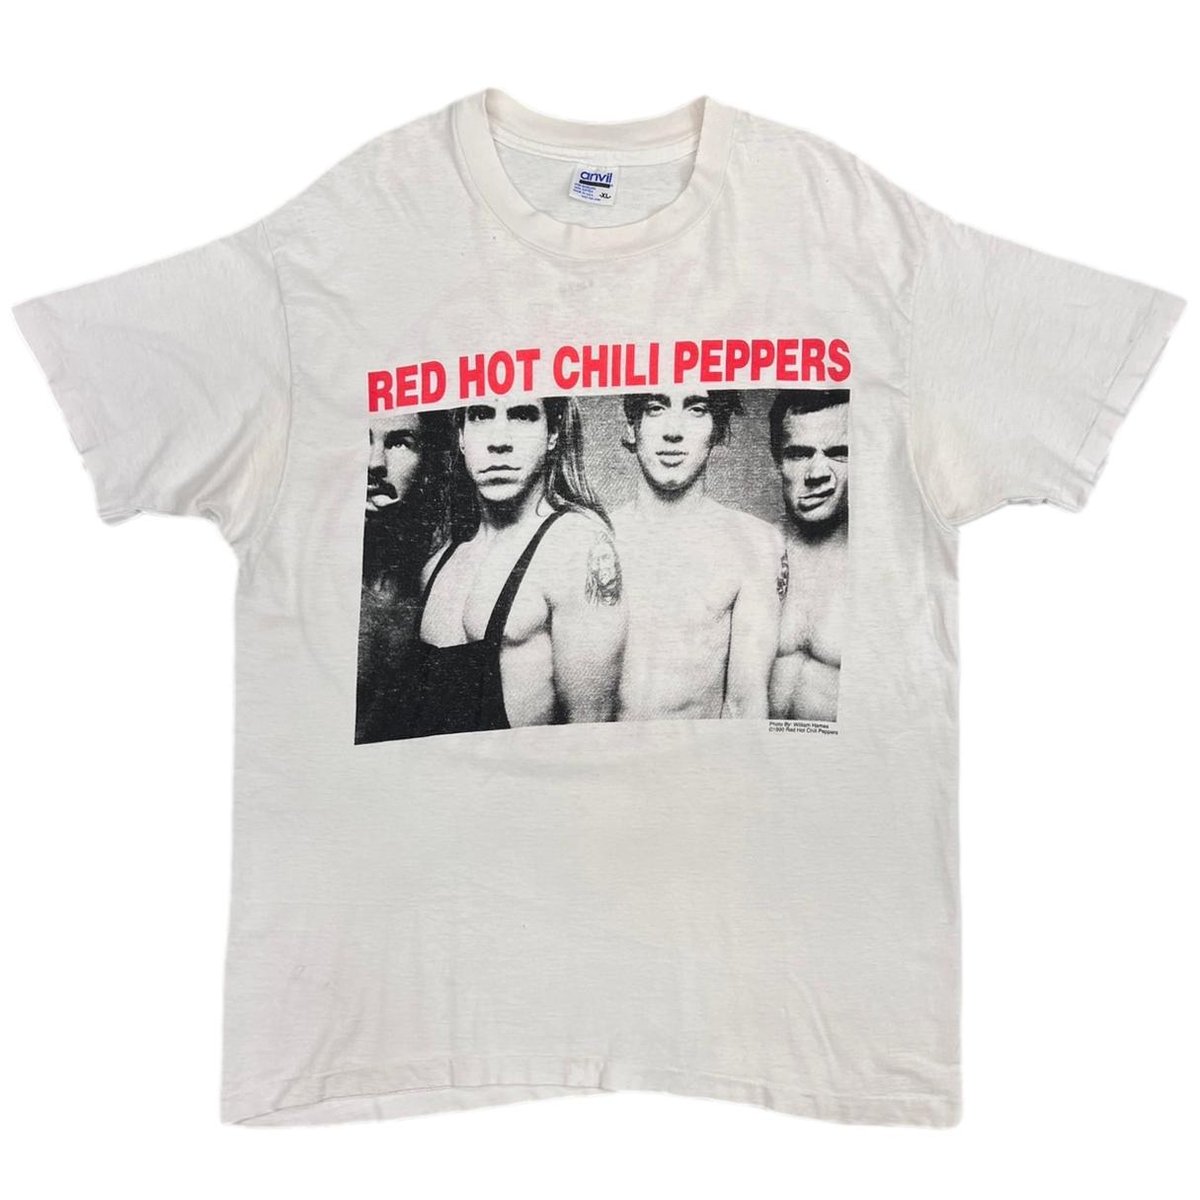 RED HOT CHILI PEPPERS PORTRAIT WHITE ANVIL XL 2144